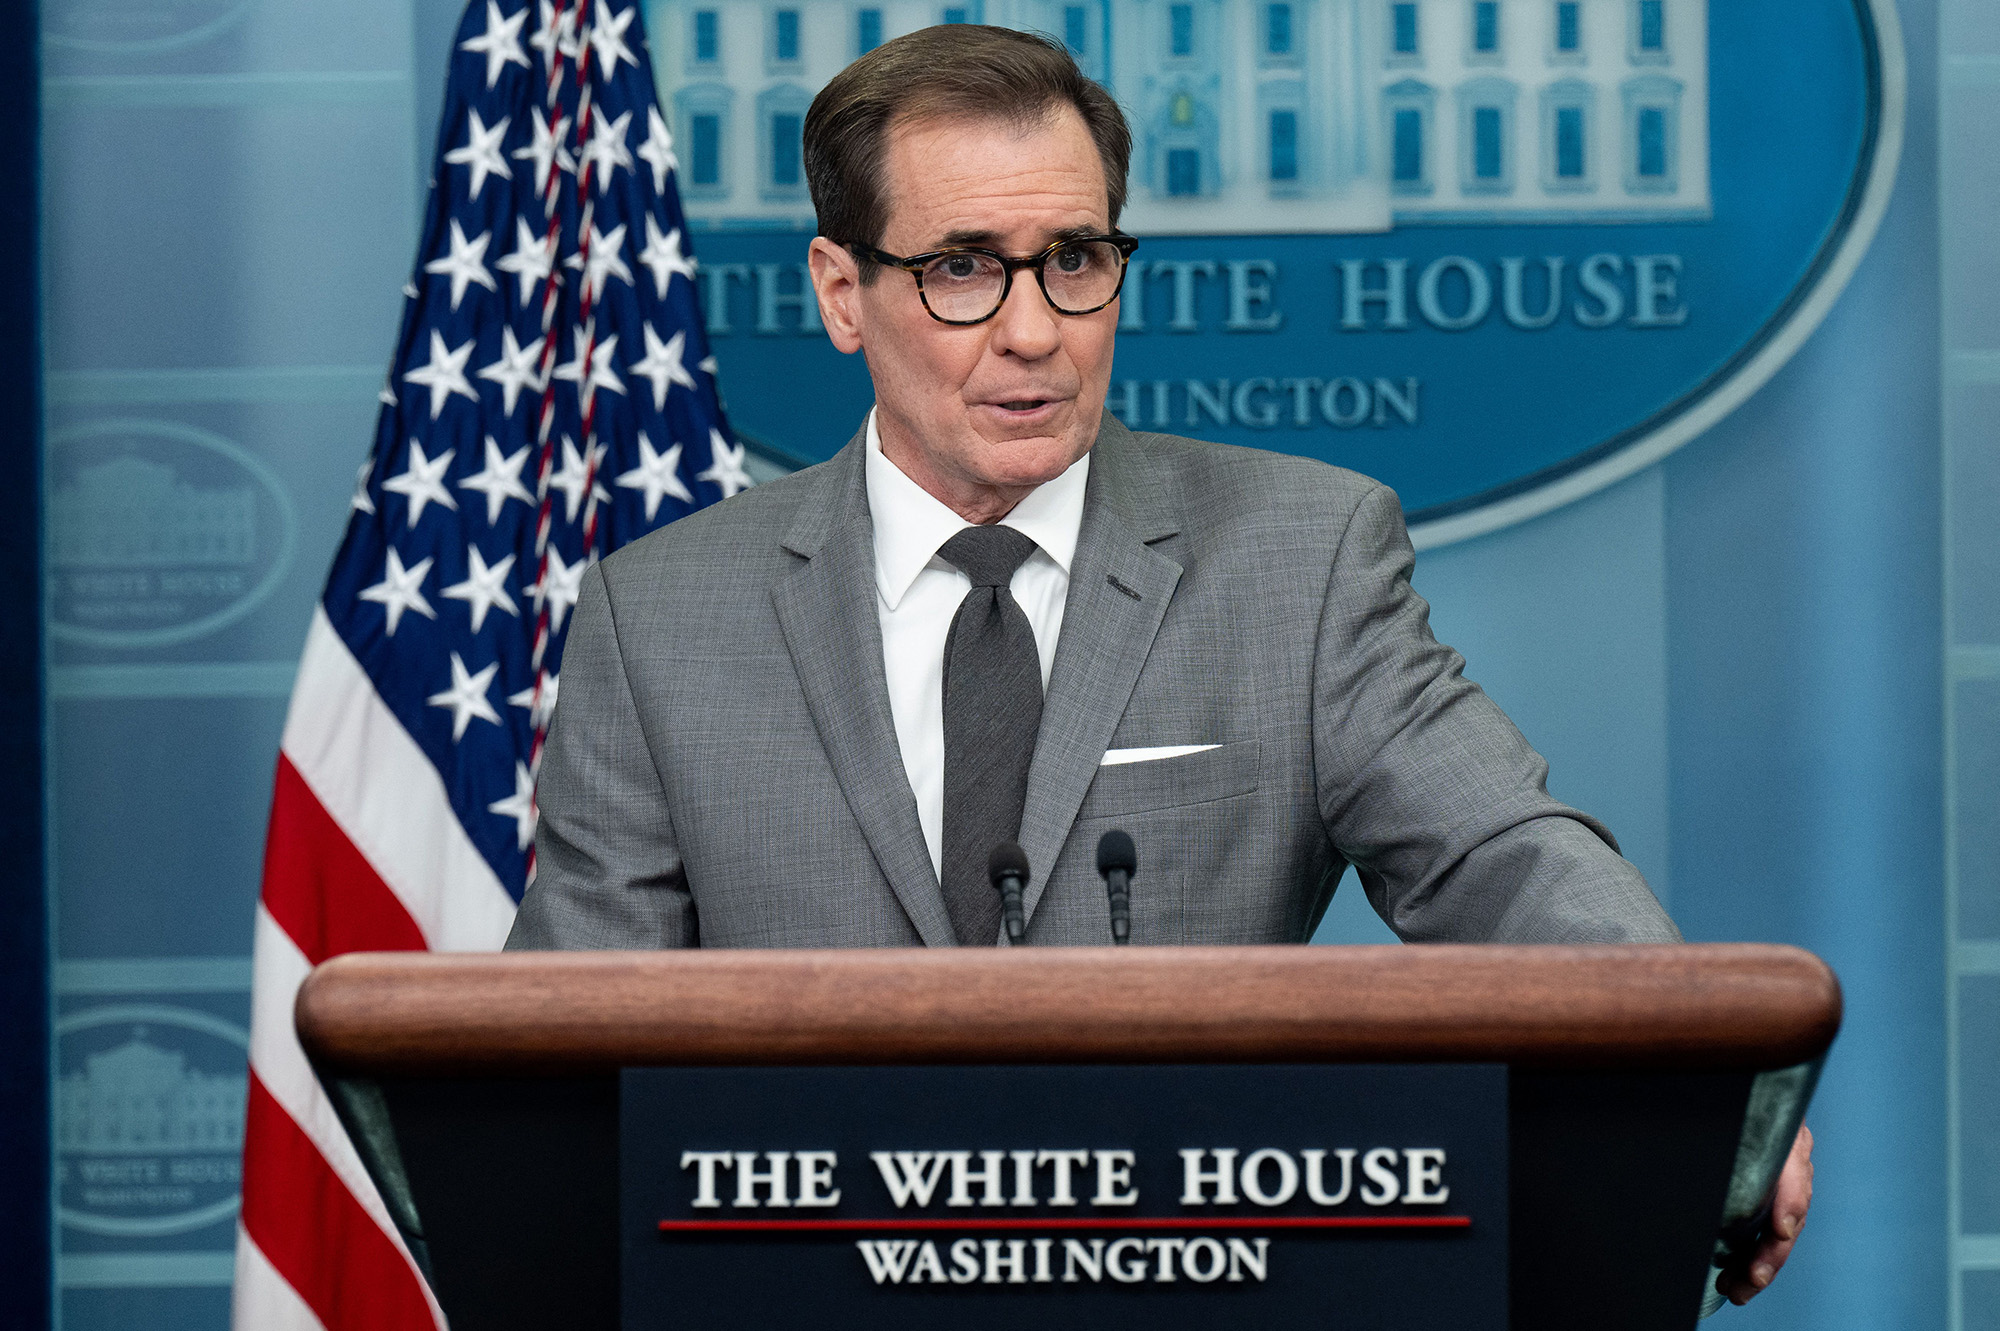 National Security Council Coordinator for Strategic Communications John Kirby speaks at the White House in Washington, DC, on February 27.